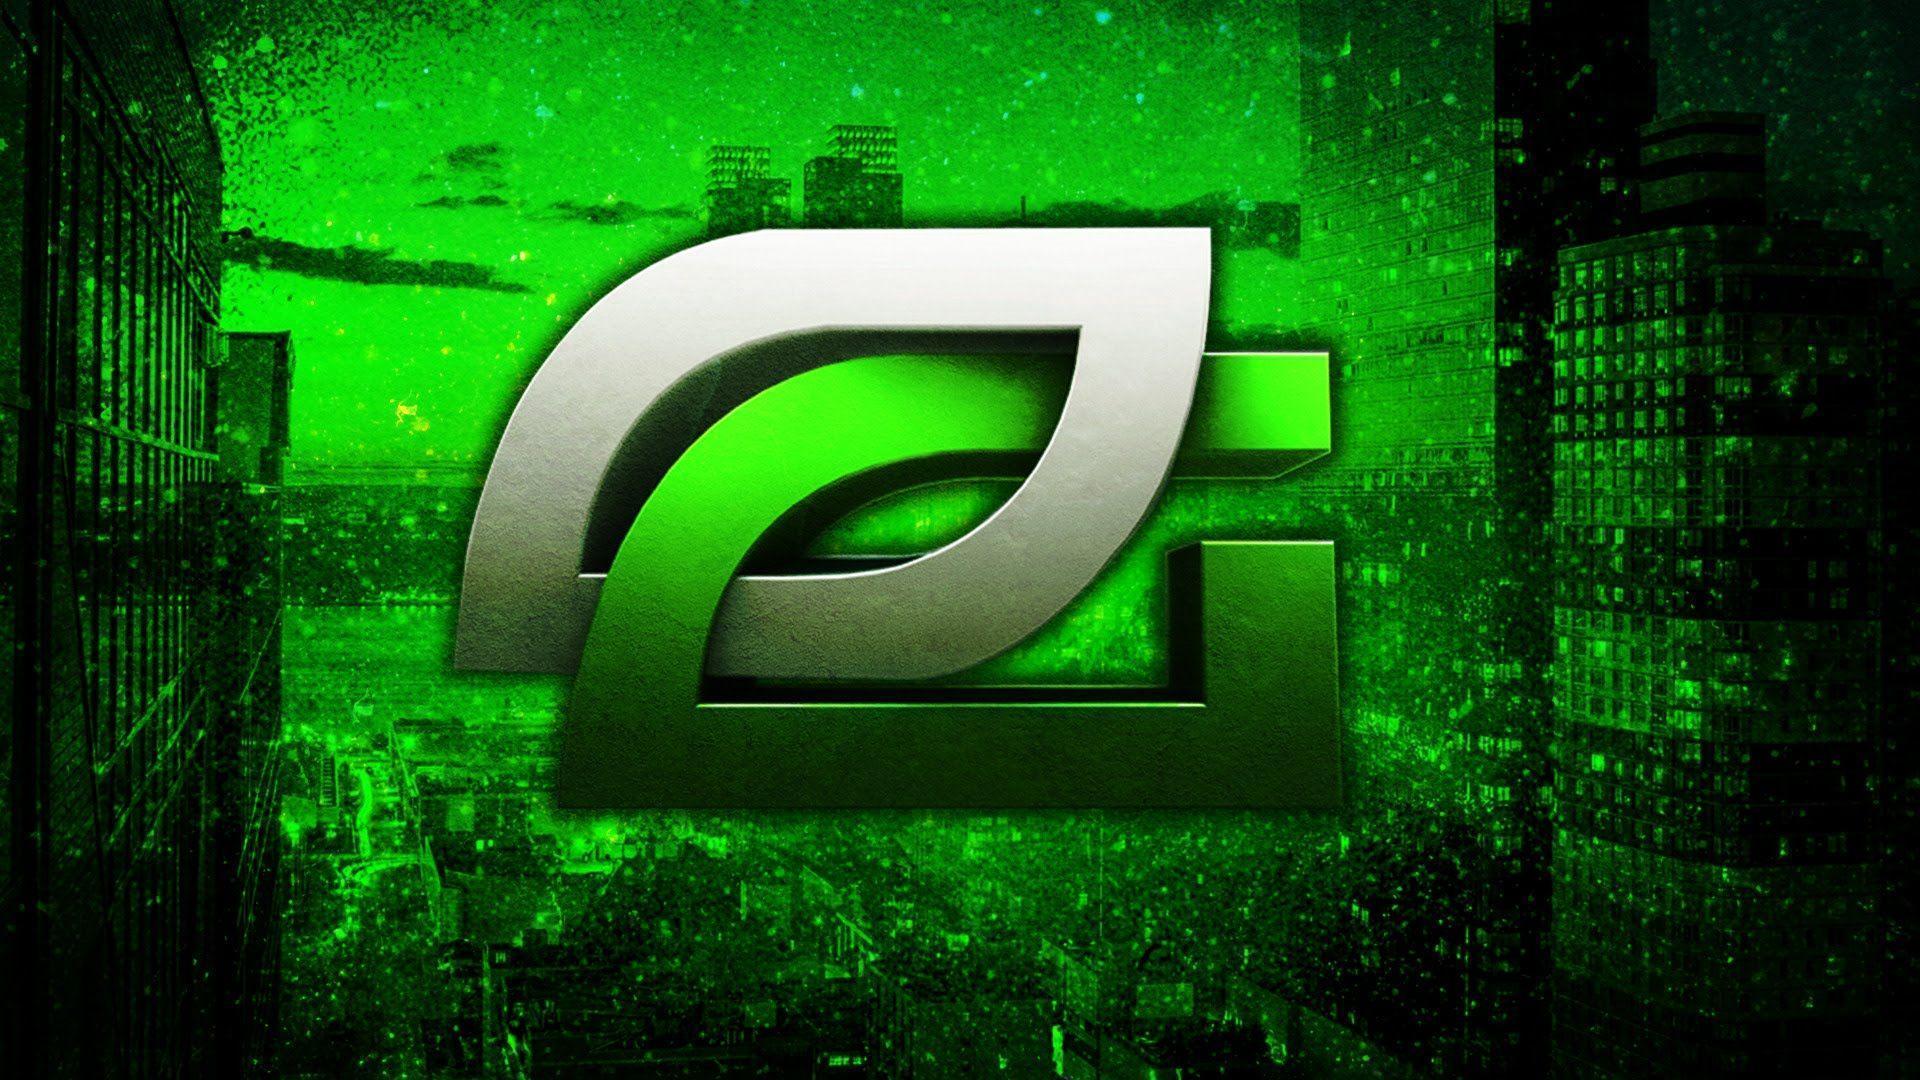 Optic Gaming Out of Cod Champs 2015